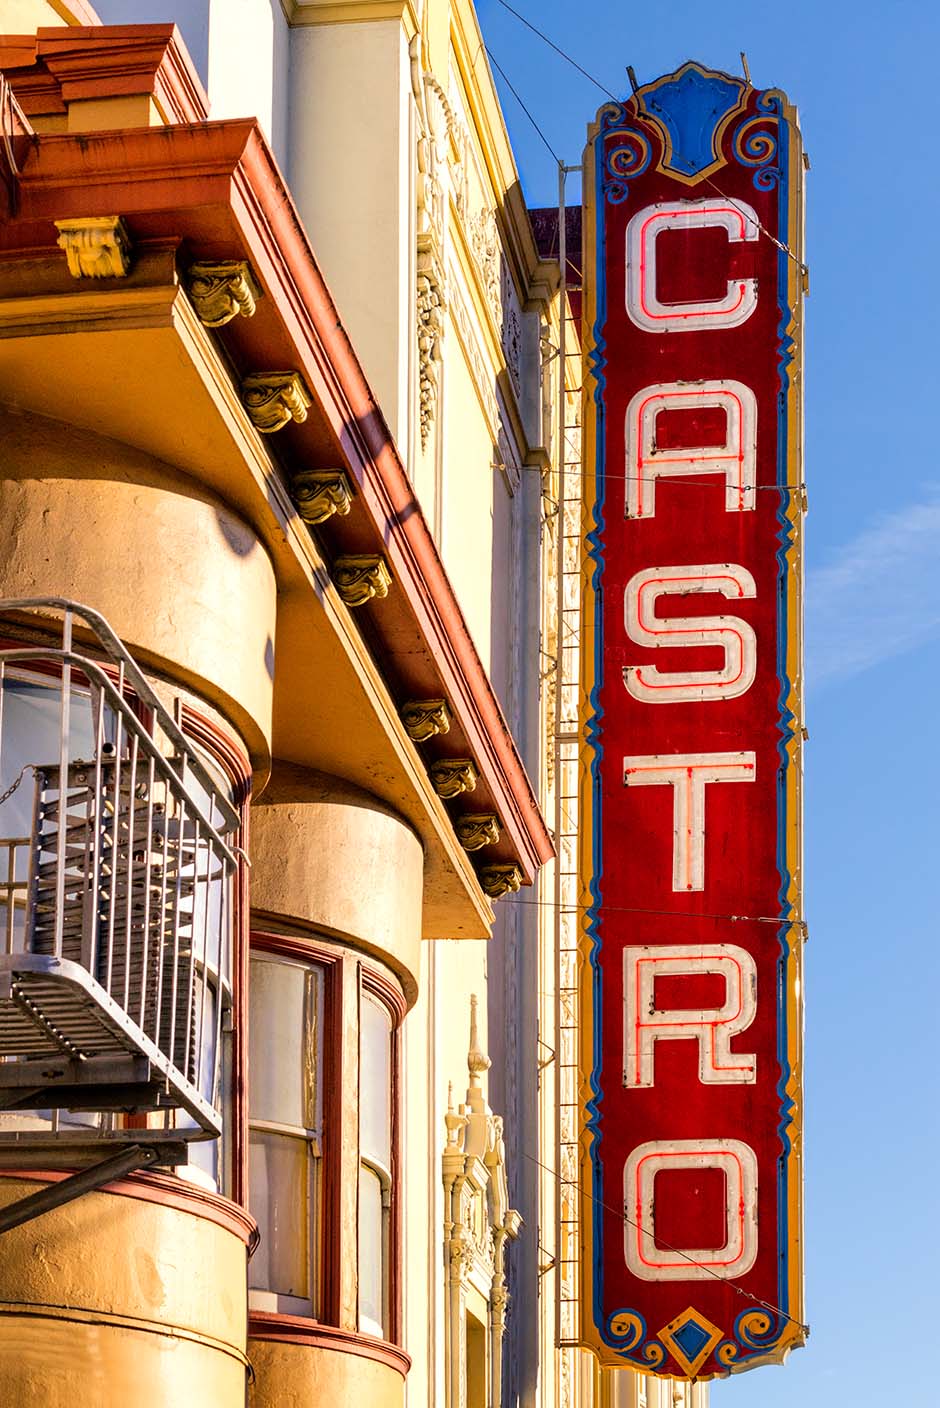 The Castro is located on Castro Street in San Francisco, CA. The theatre was built in 1922 and is one of the few remaining movie houses still in use from that period.